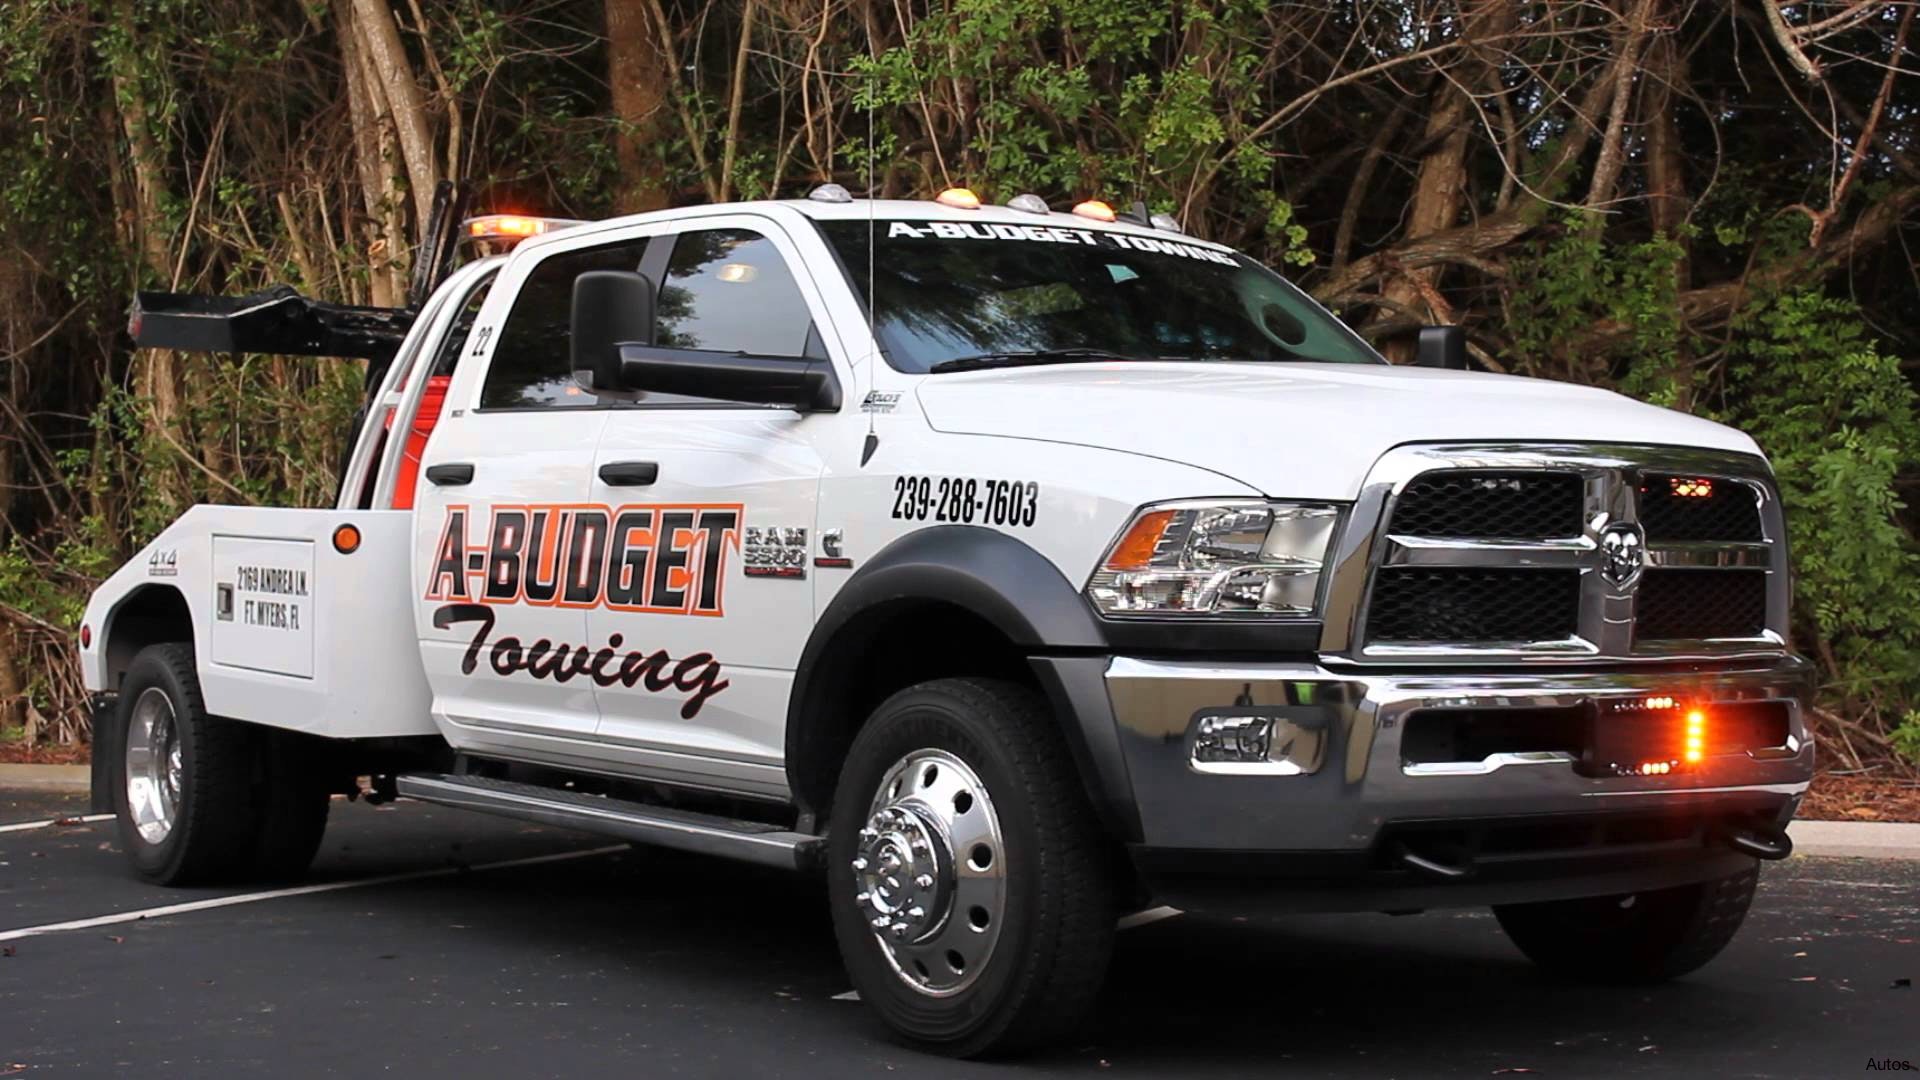 Dodge Ram 4500 A Budget Towing Tow Truck Hd Wallpaper Background Image 1920x1080